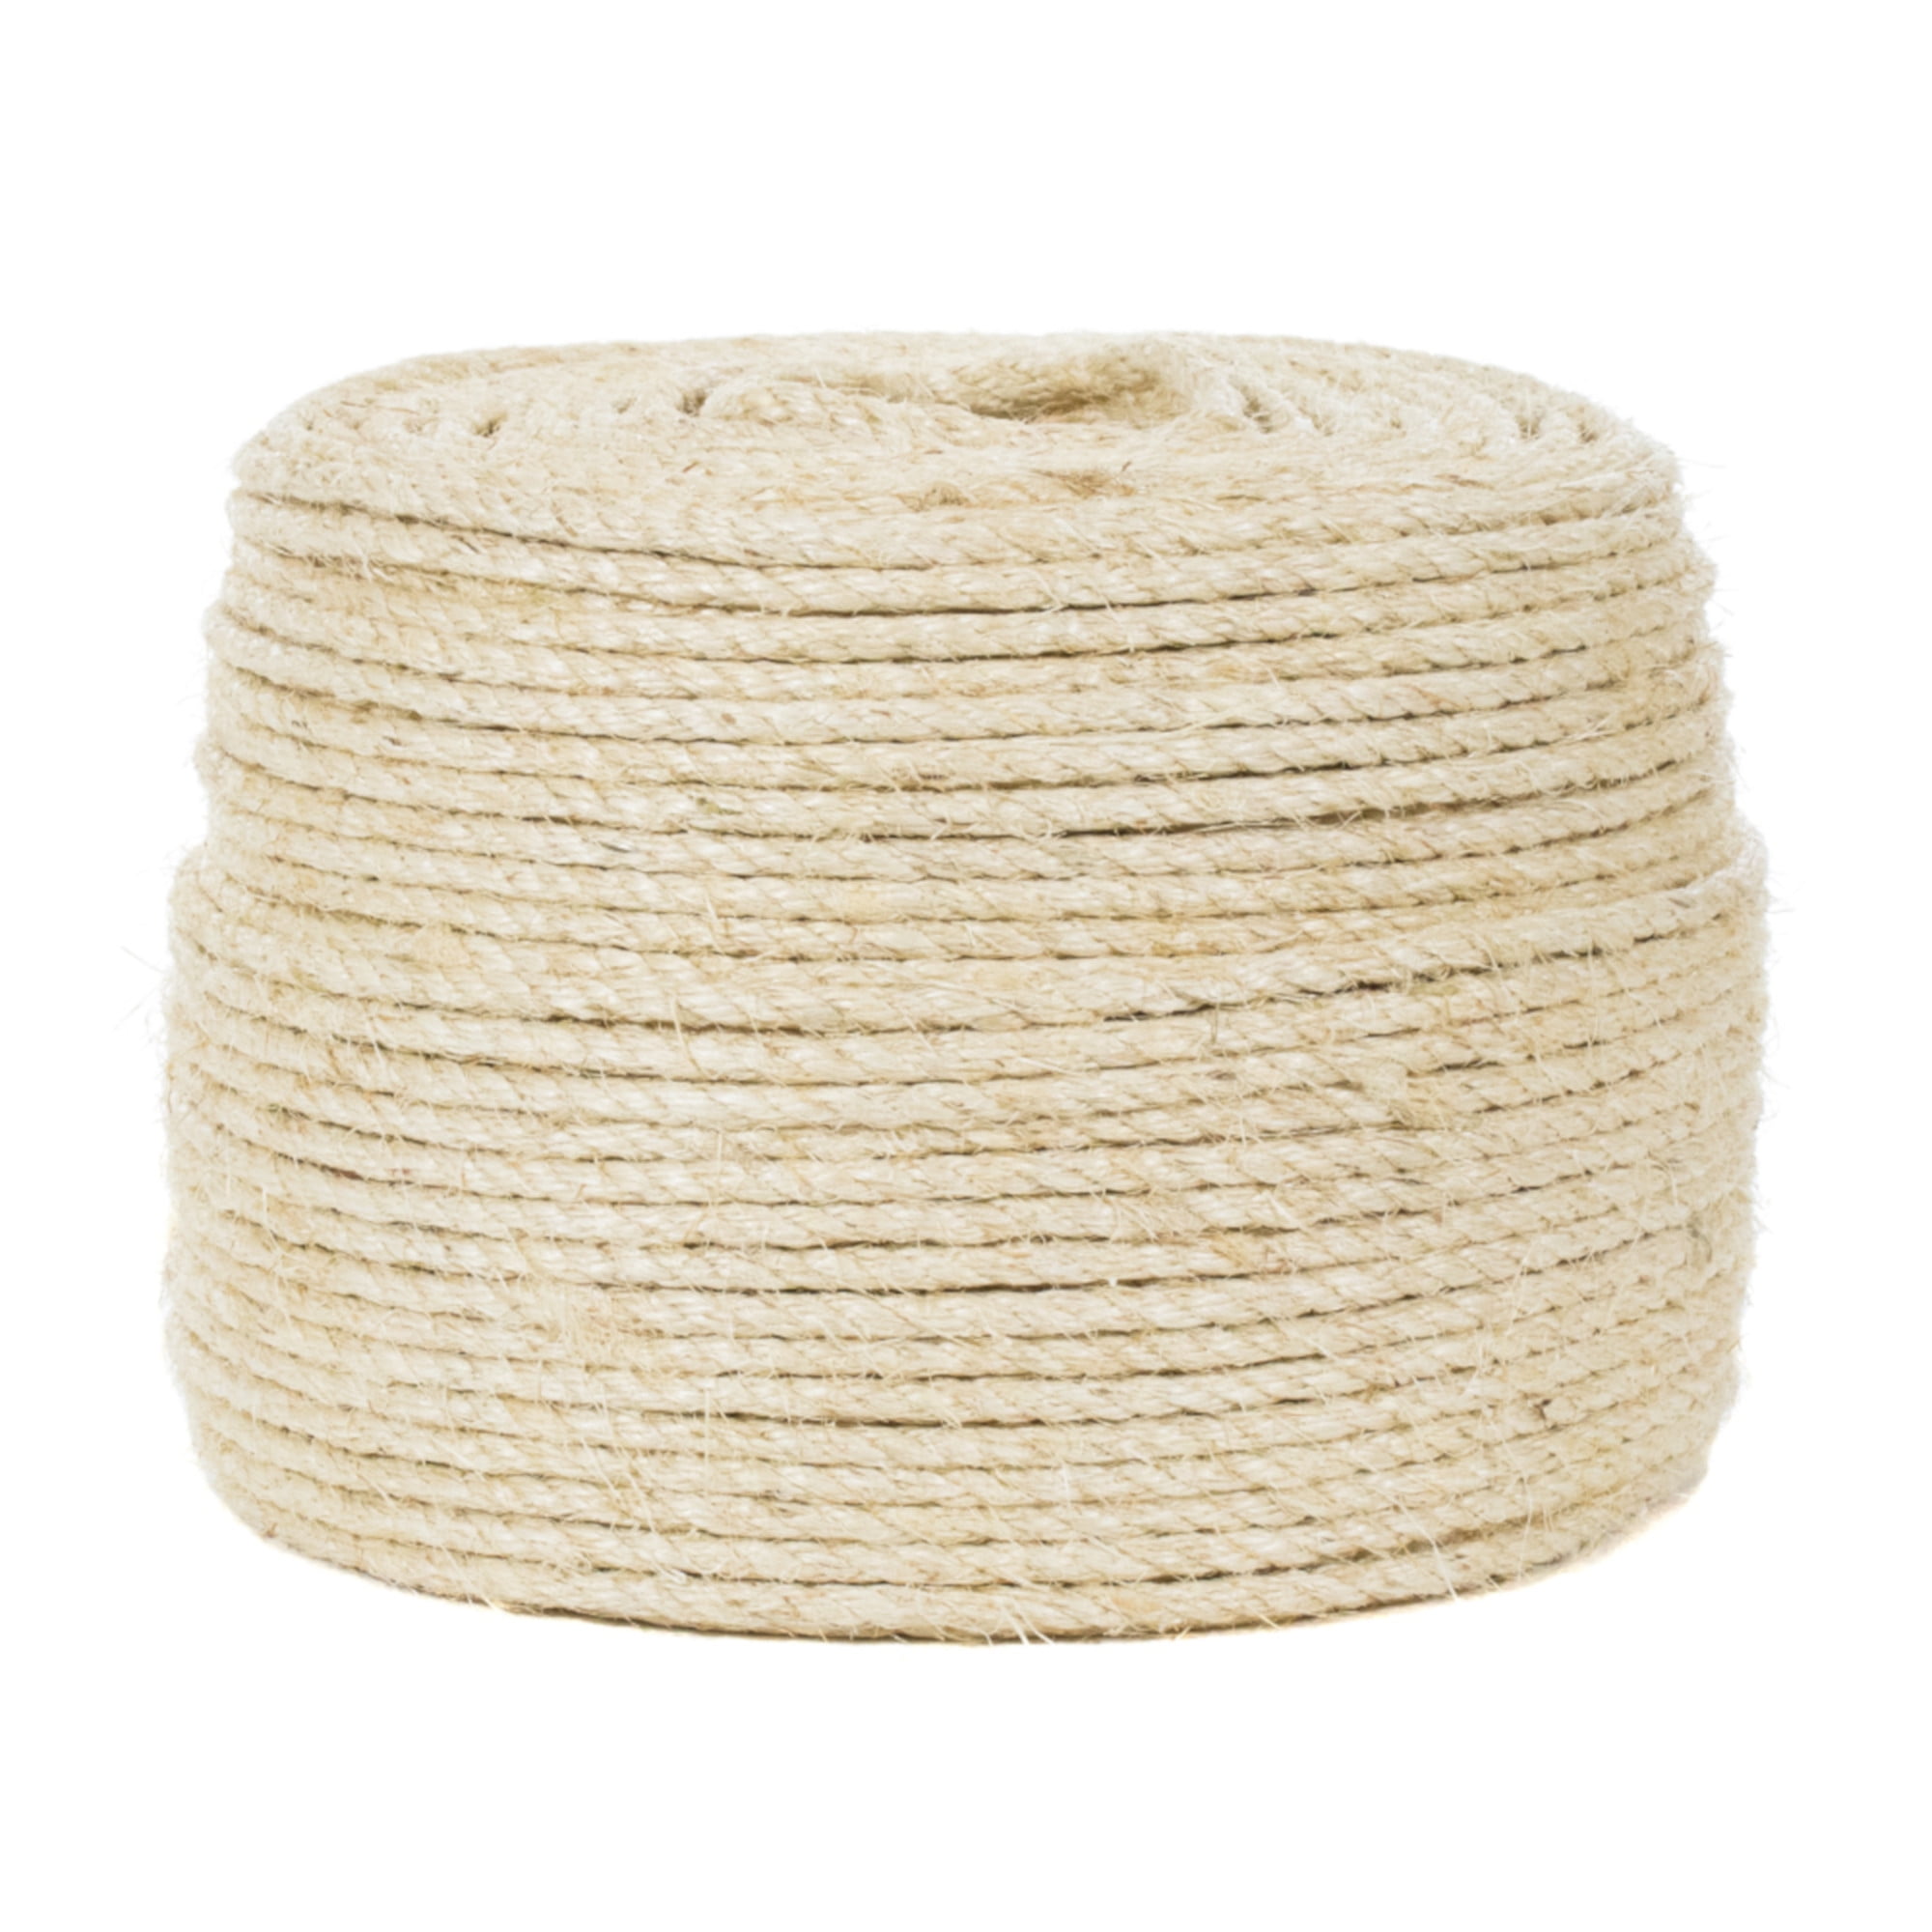 Golberg Twisted Sisal Rope Available in 1/4, 5/16, 3/8, 1/2, 3/4, and 1-Inch Diameters in Various Lengths, Size: 1/2 inch, White